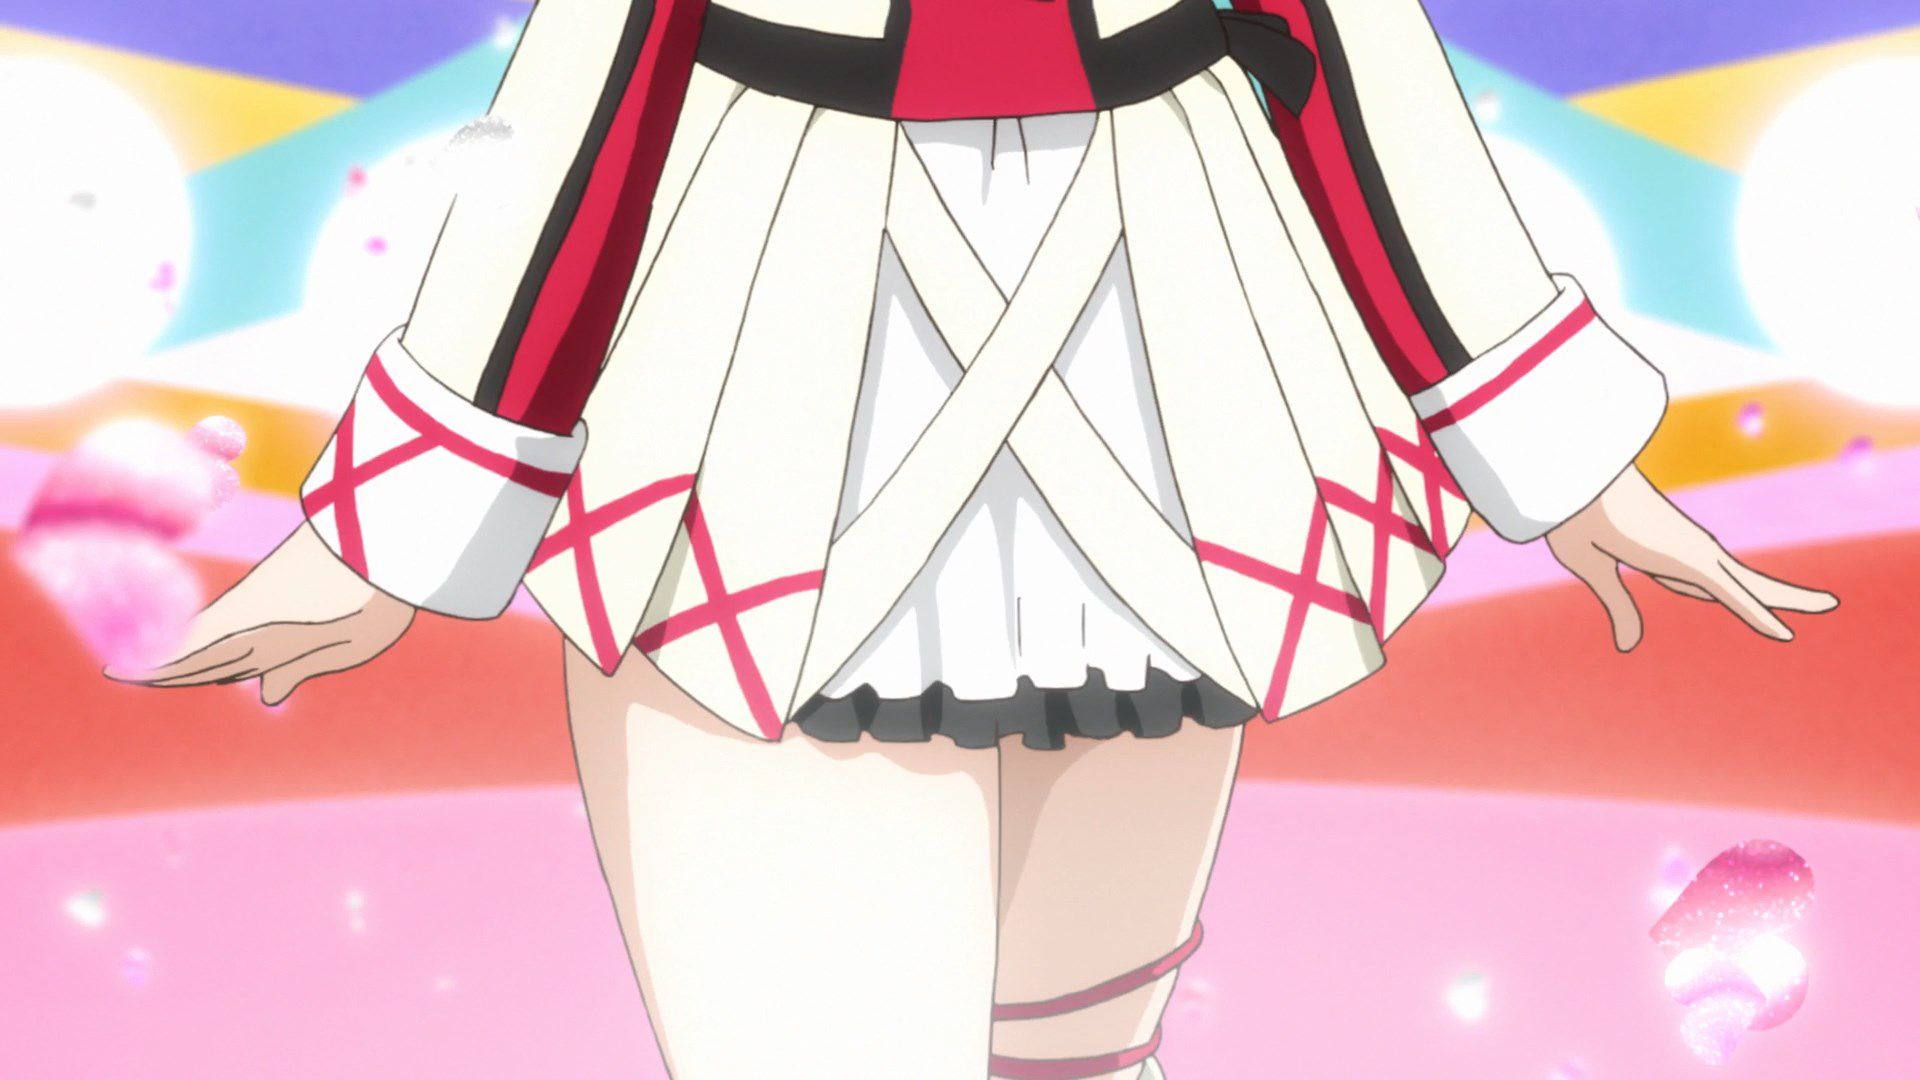 [God images] "love live! ' Μm ' PV's leg is too erotic everyone wakes up to a leg fetish of wwwww 58